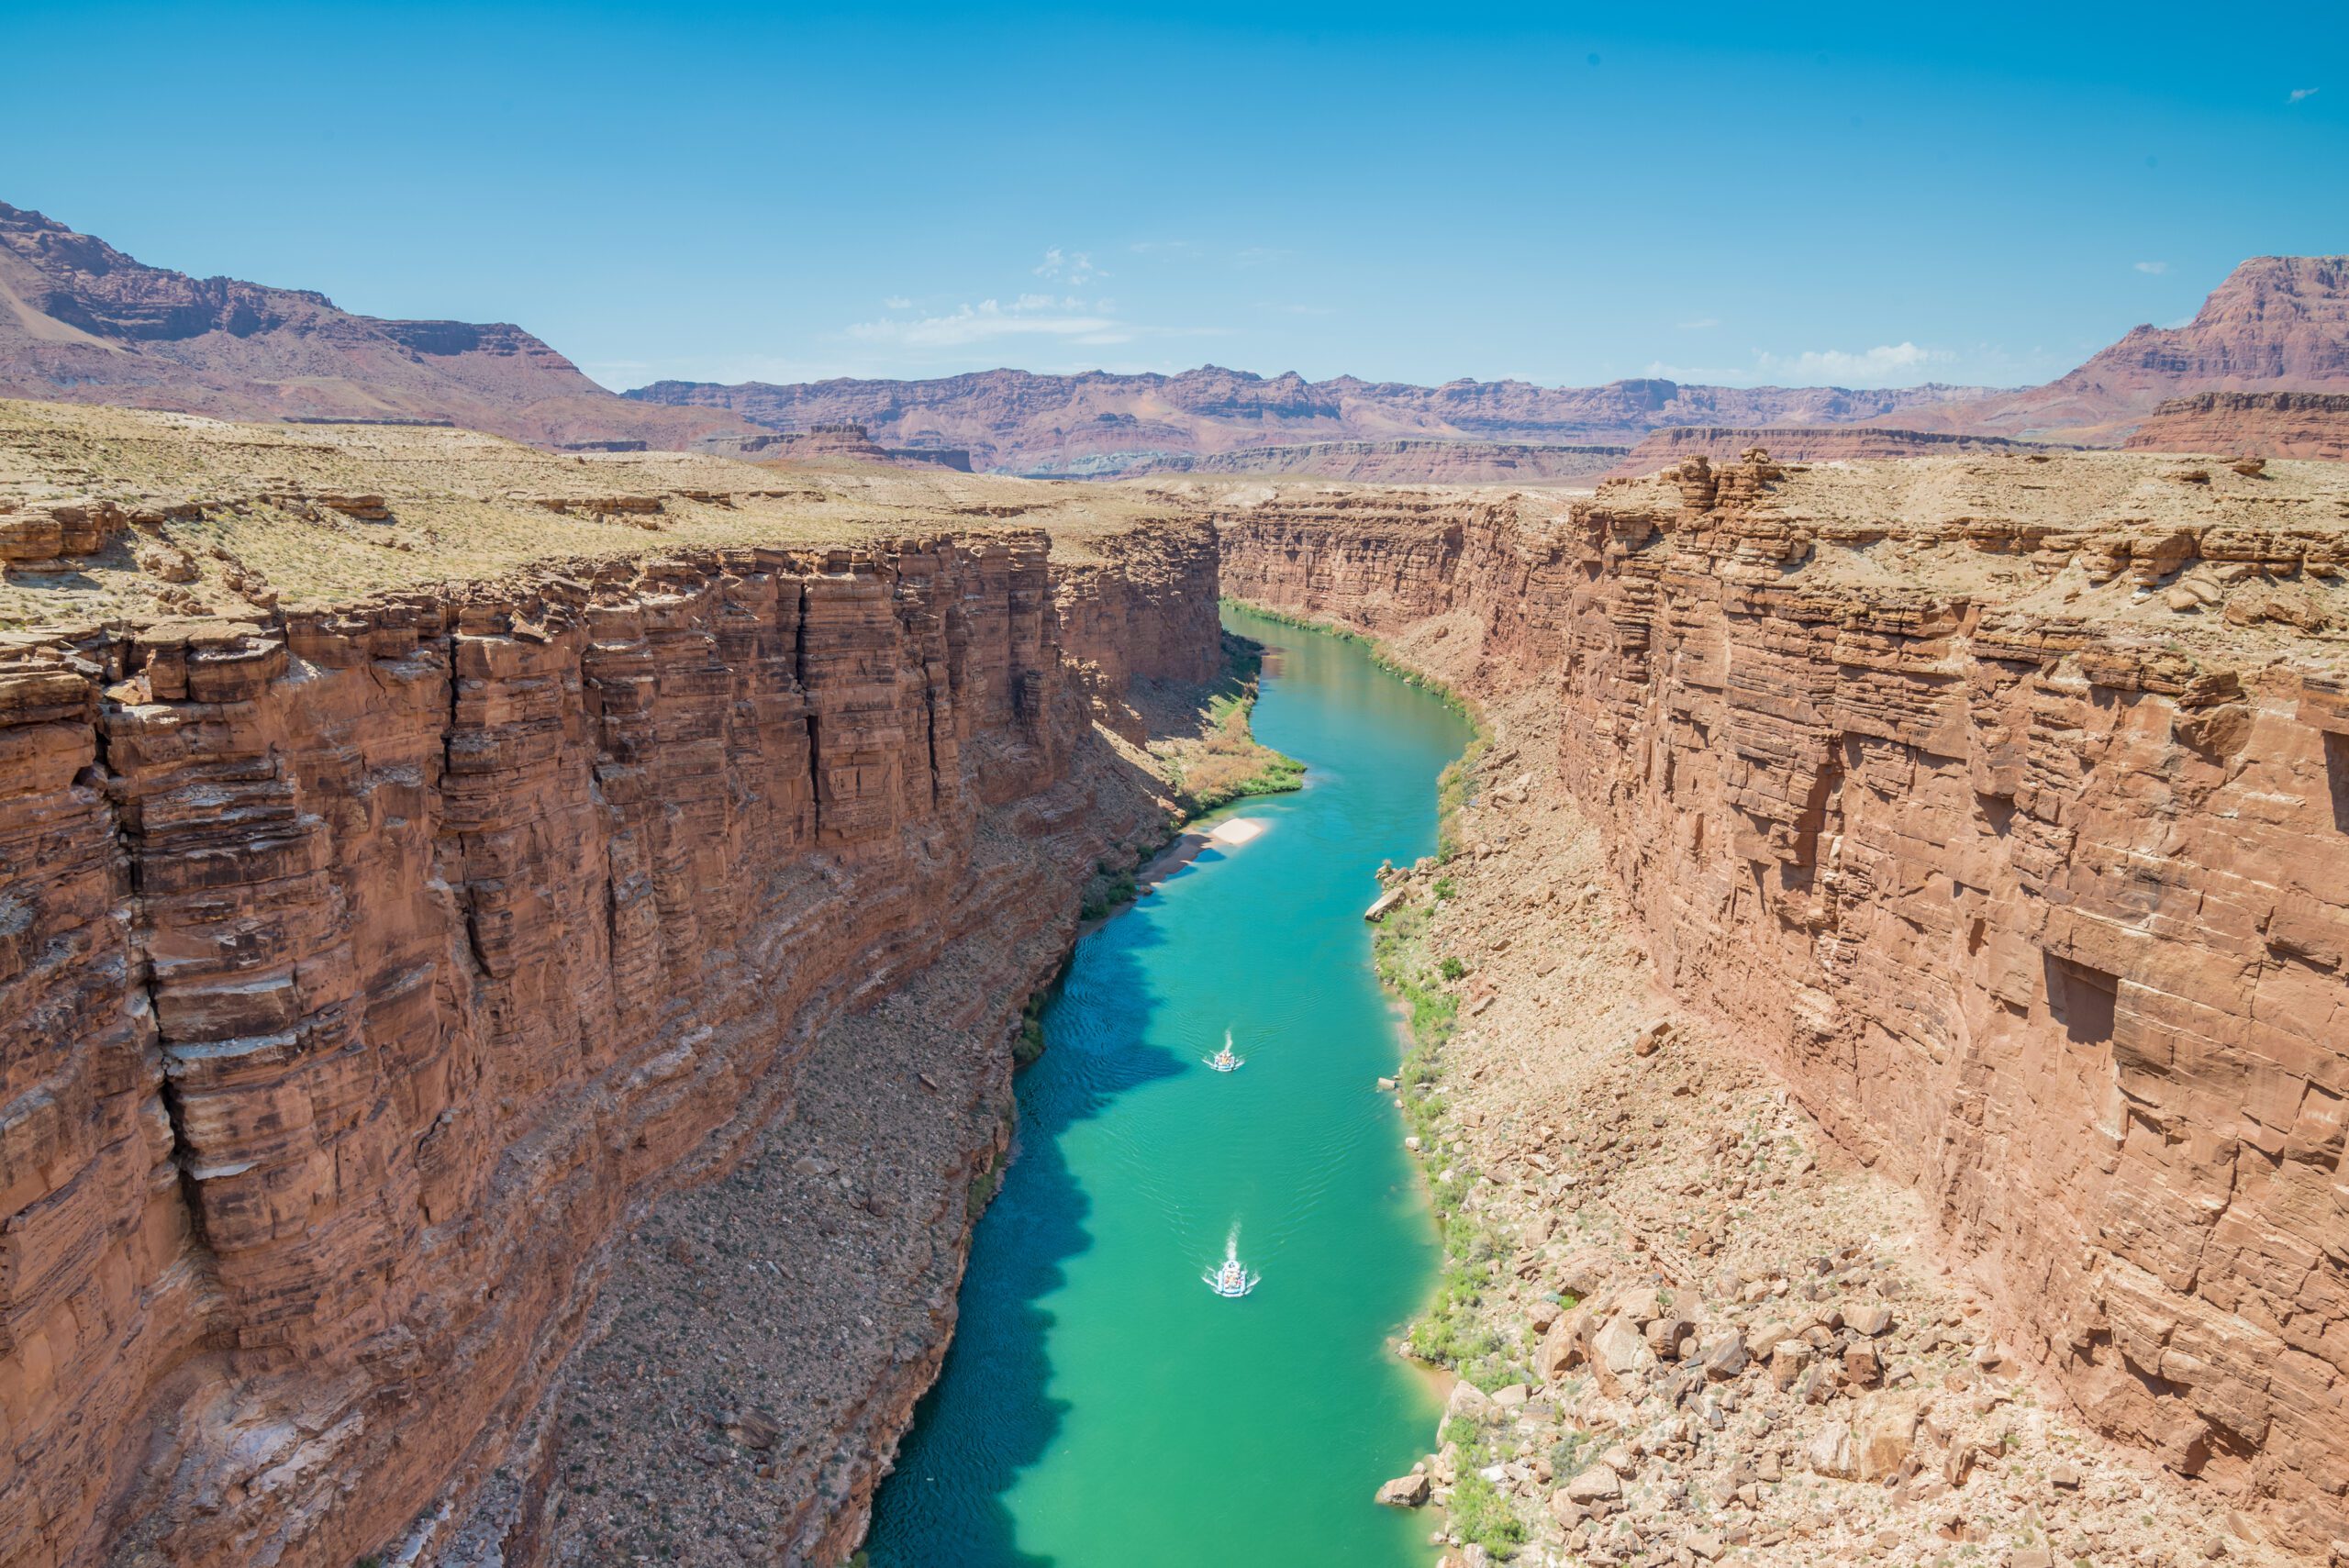 View of the Colorado River in the Grand Canyon from the Navajo B